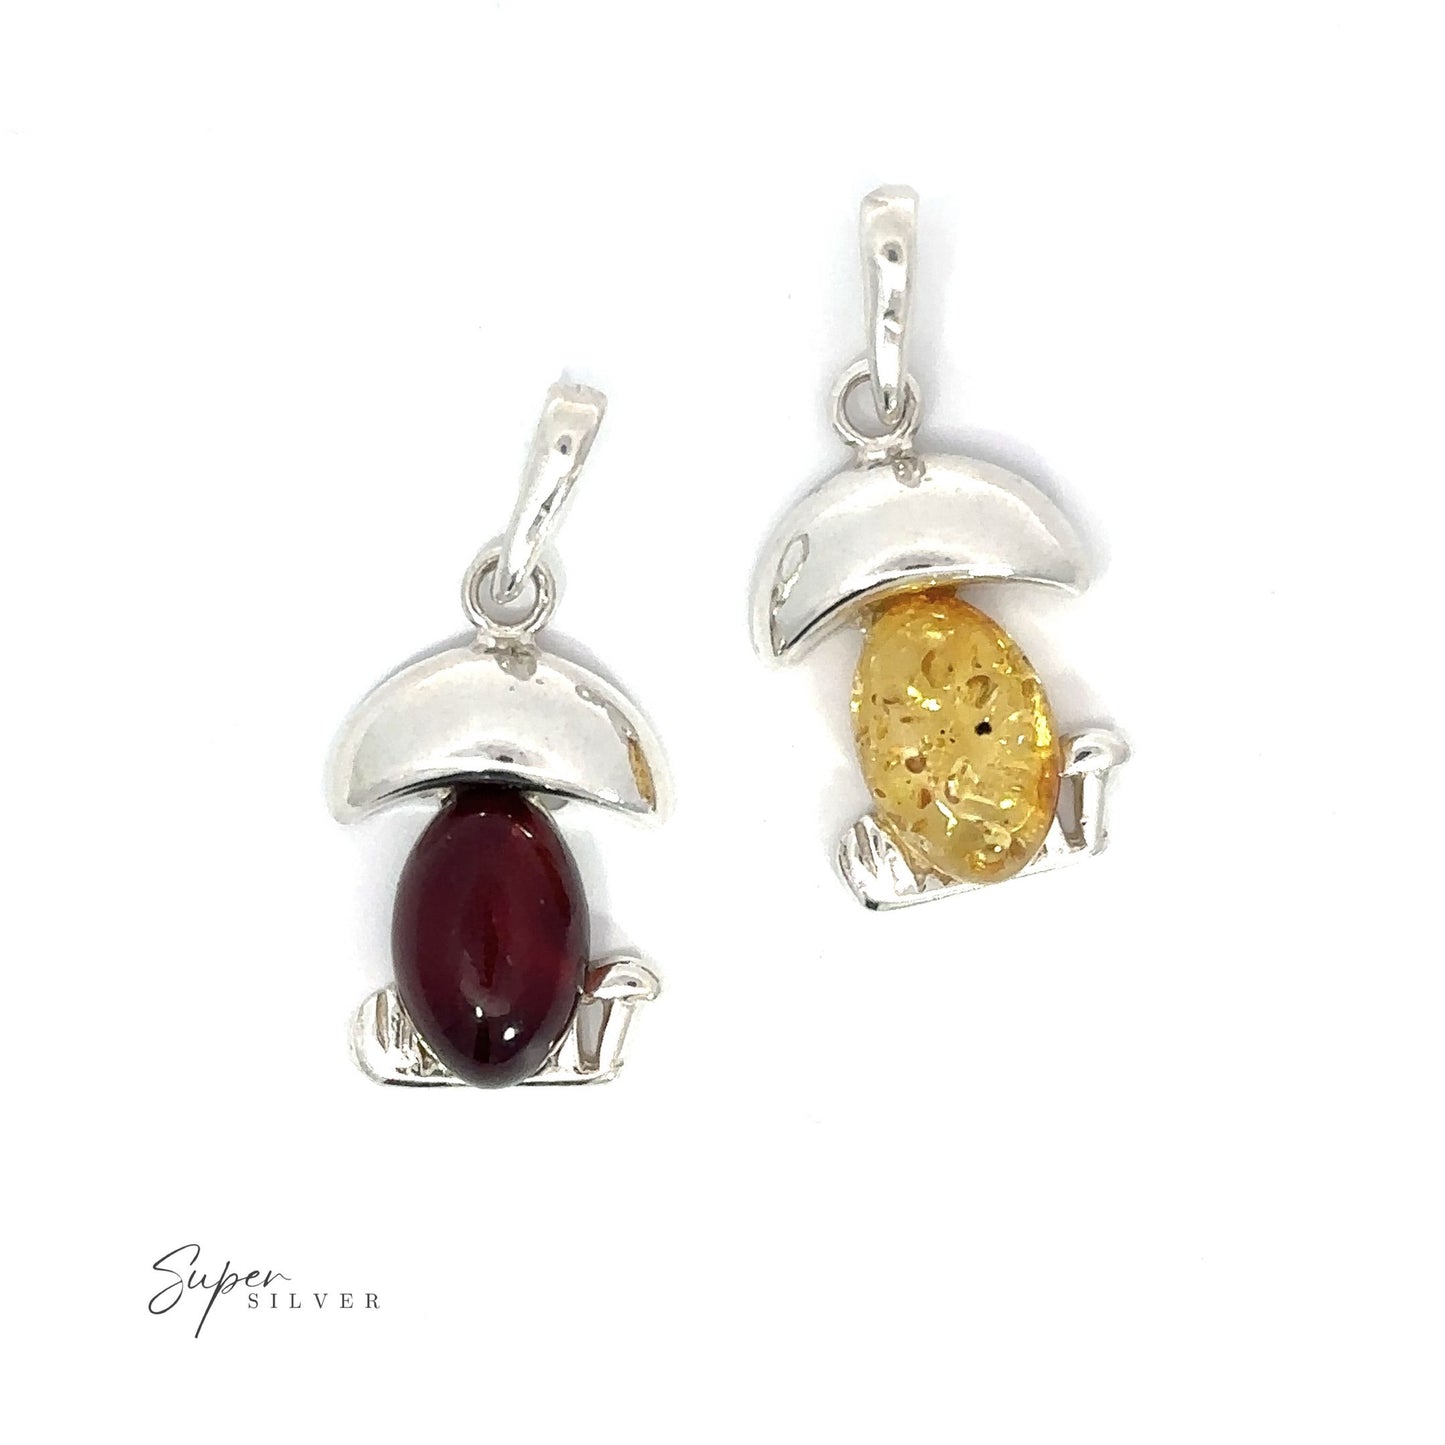 Two funky silver charms featuring a red and yellow Amber Mushroom Pendant and a green Amber Mushroom Pendant, inspired by Mother Nature's charm.